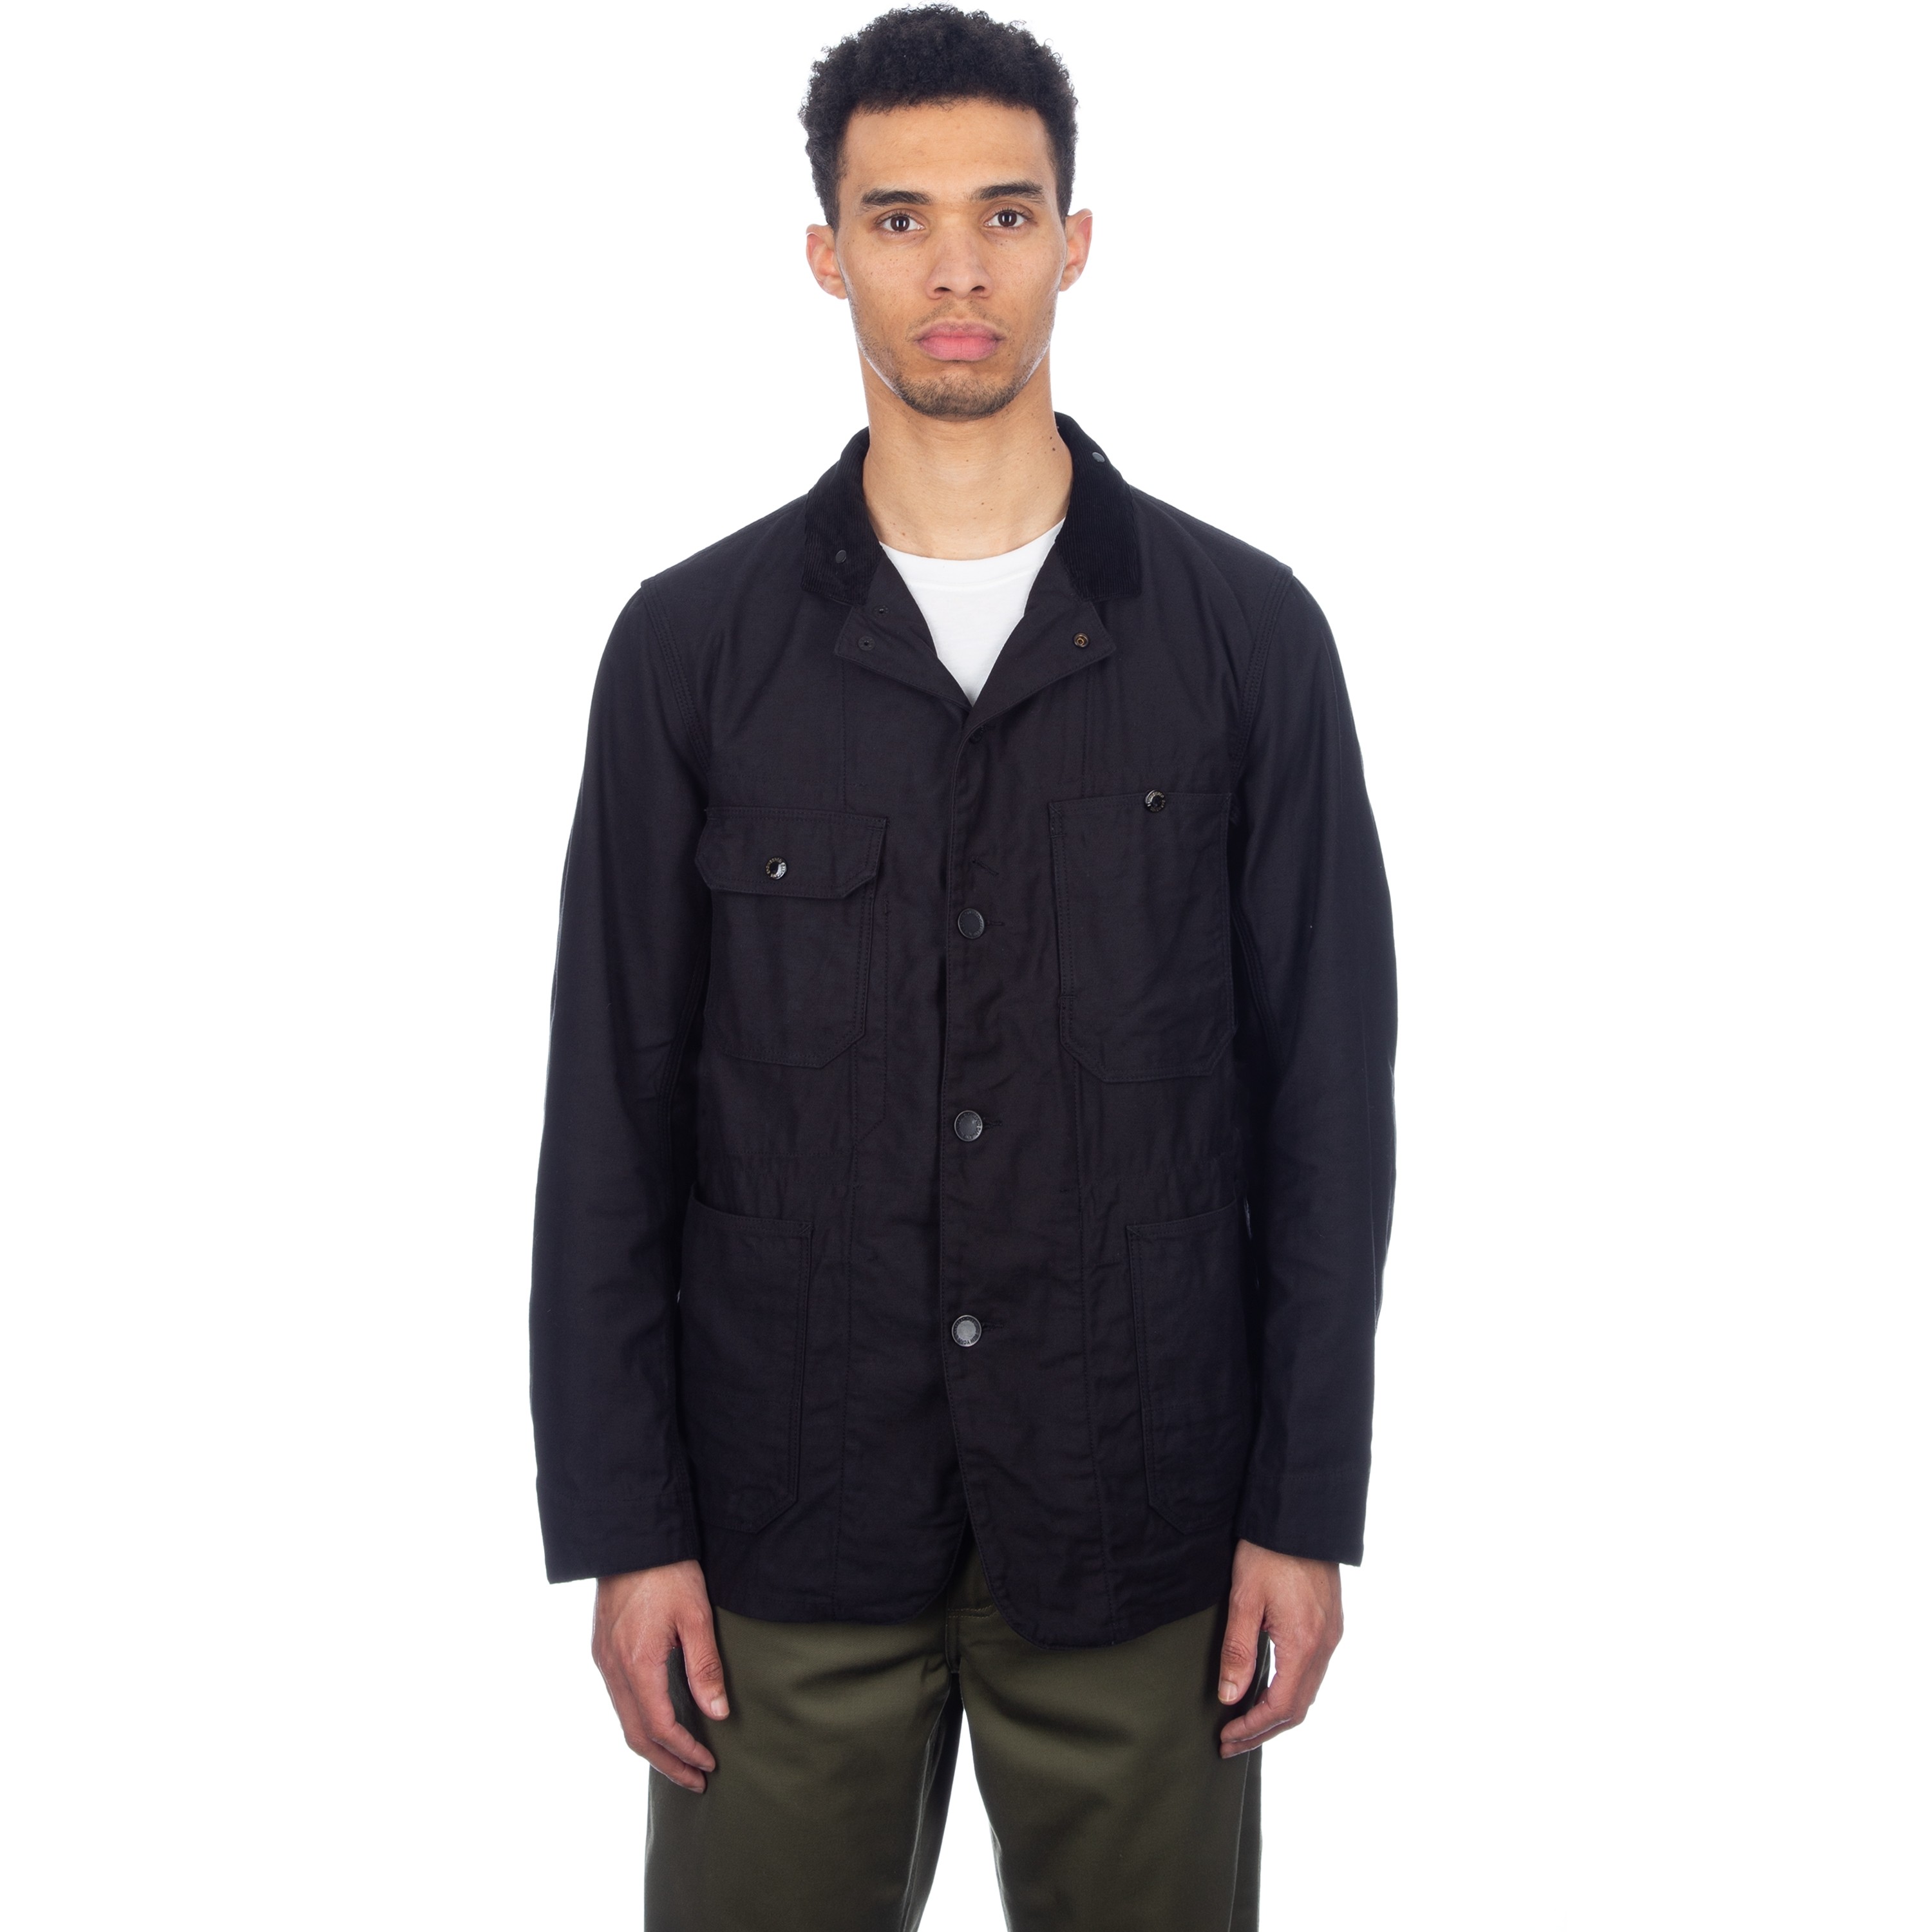 Engineered Garments Coverall Jacket (Black Cotton Reversed Sateen